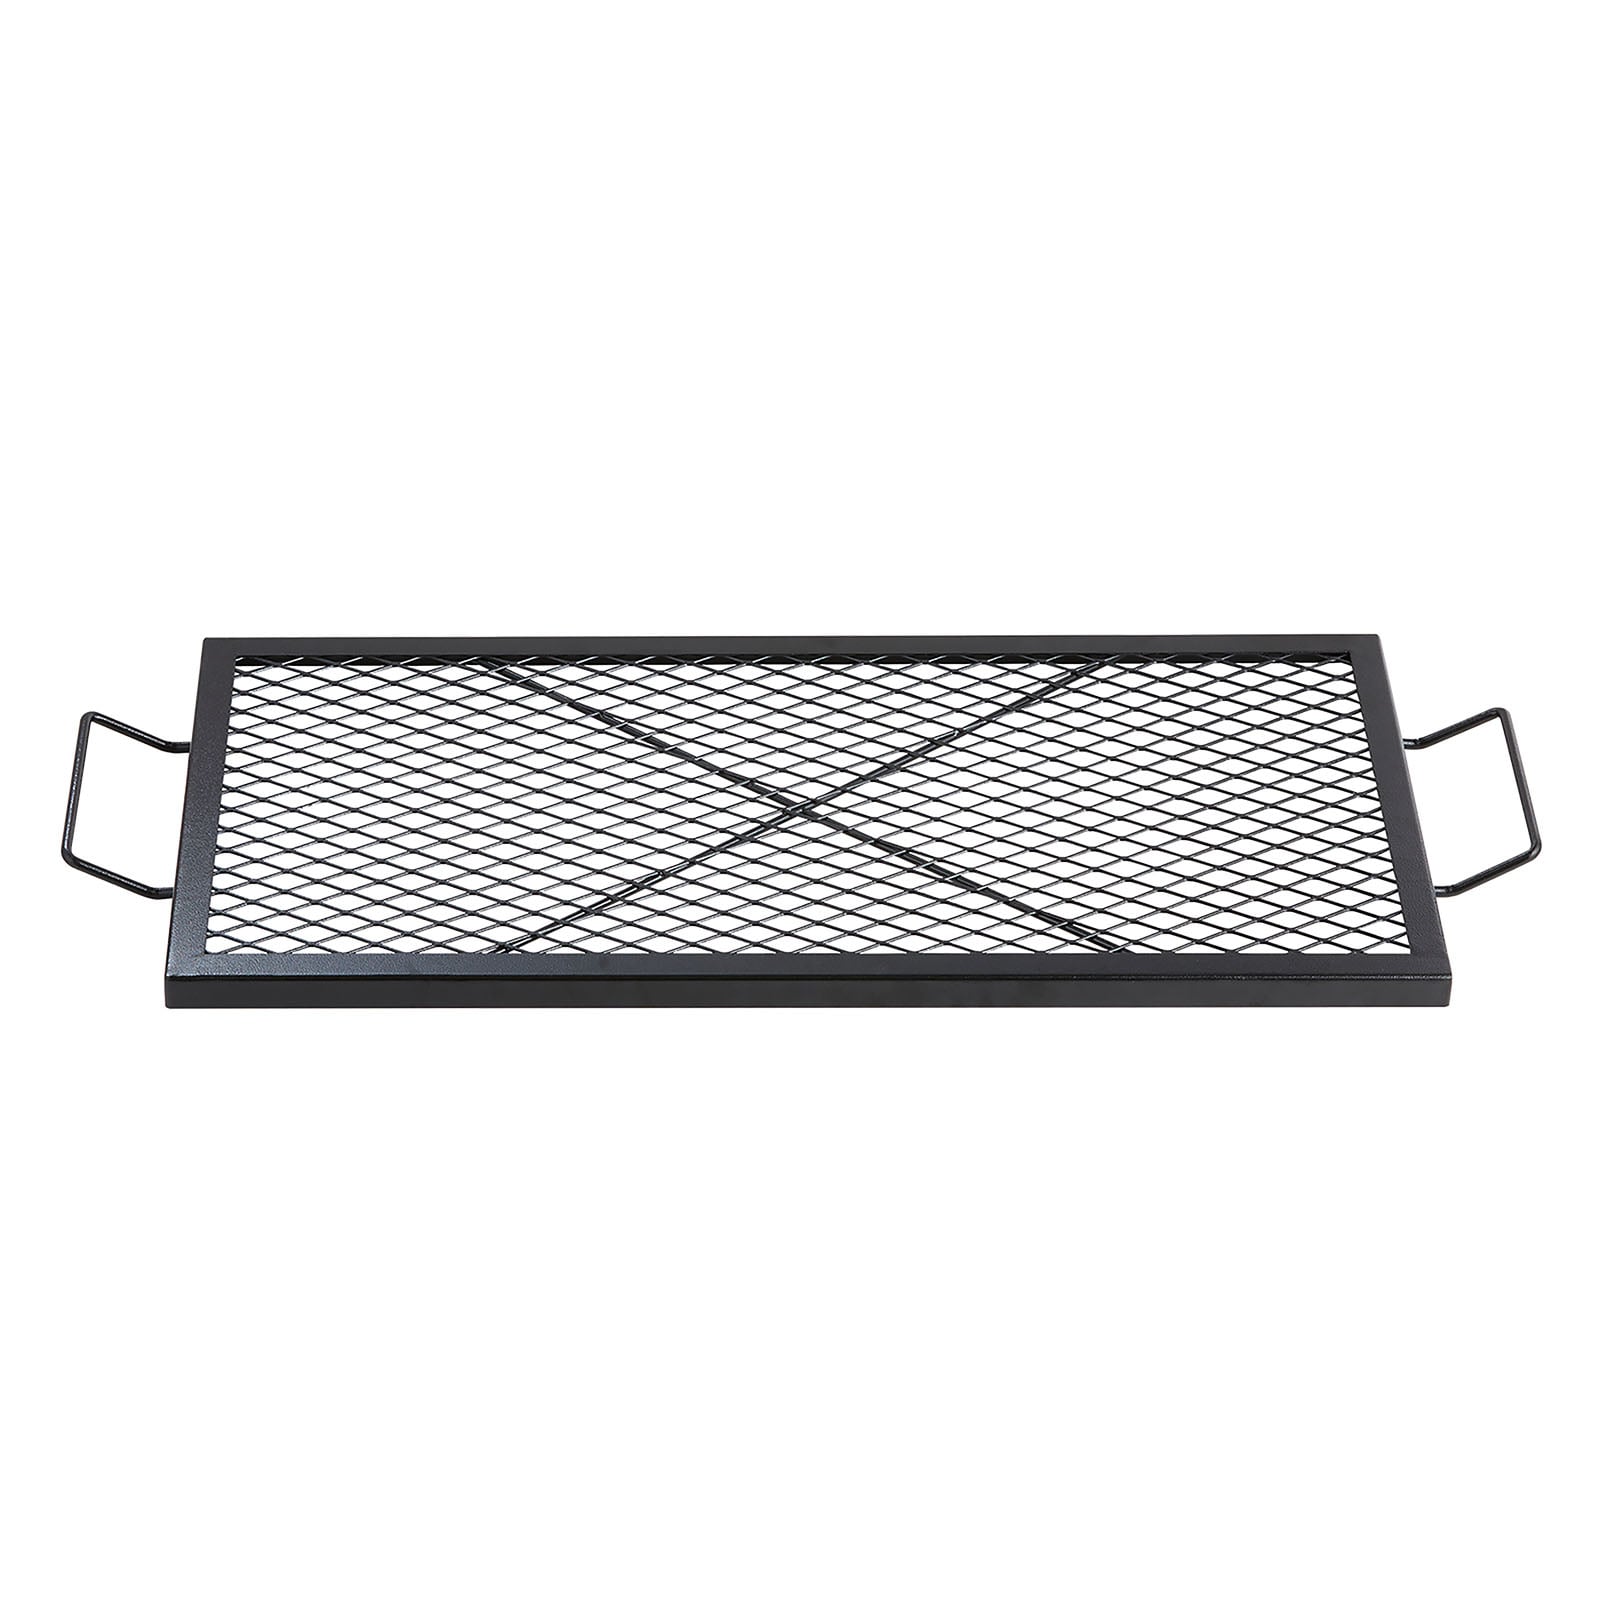 VEVOR 23 x 16 Heavy Duty Steel Stove Top Griddle with 2 Handles